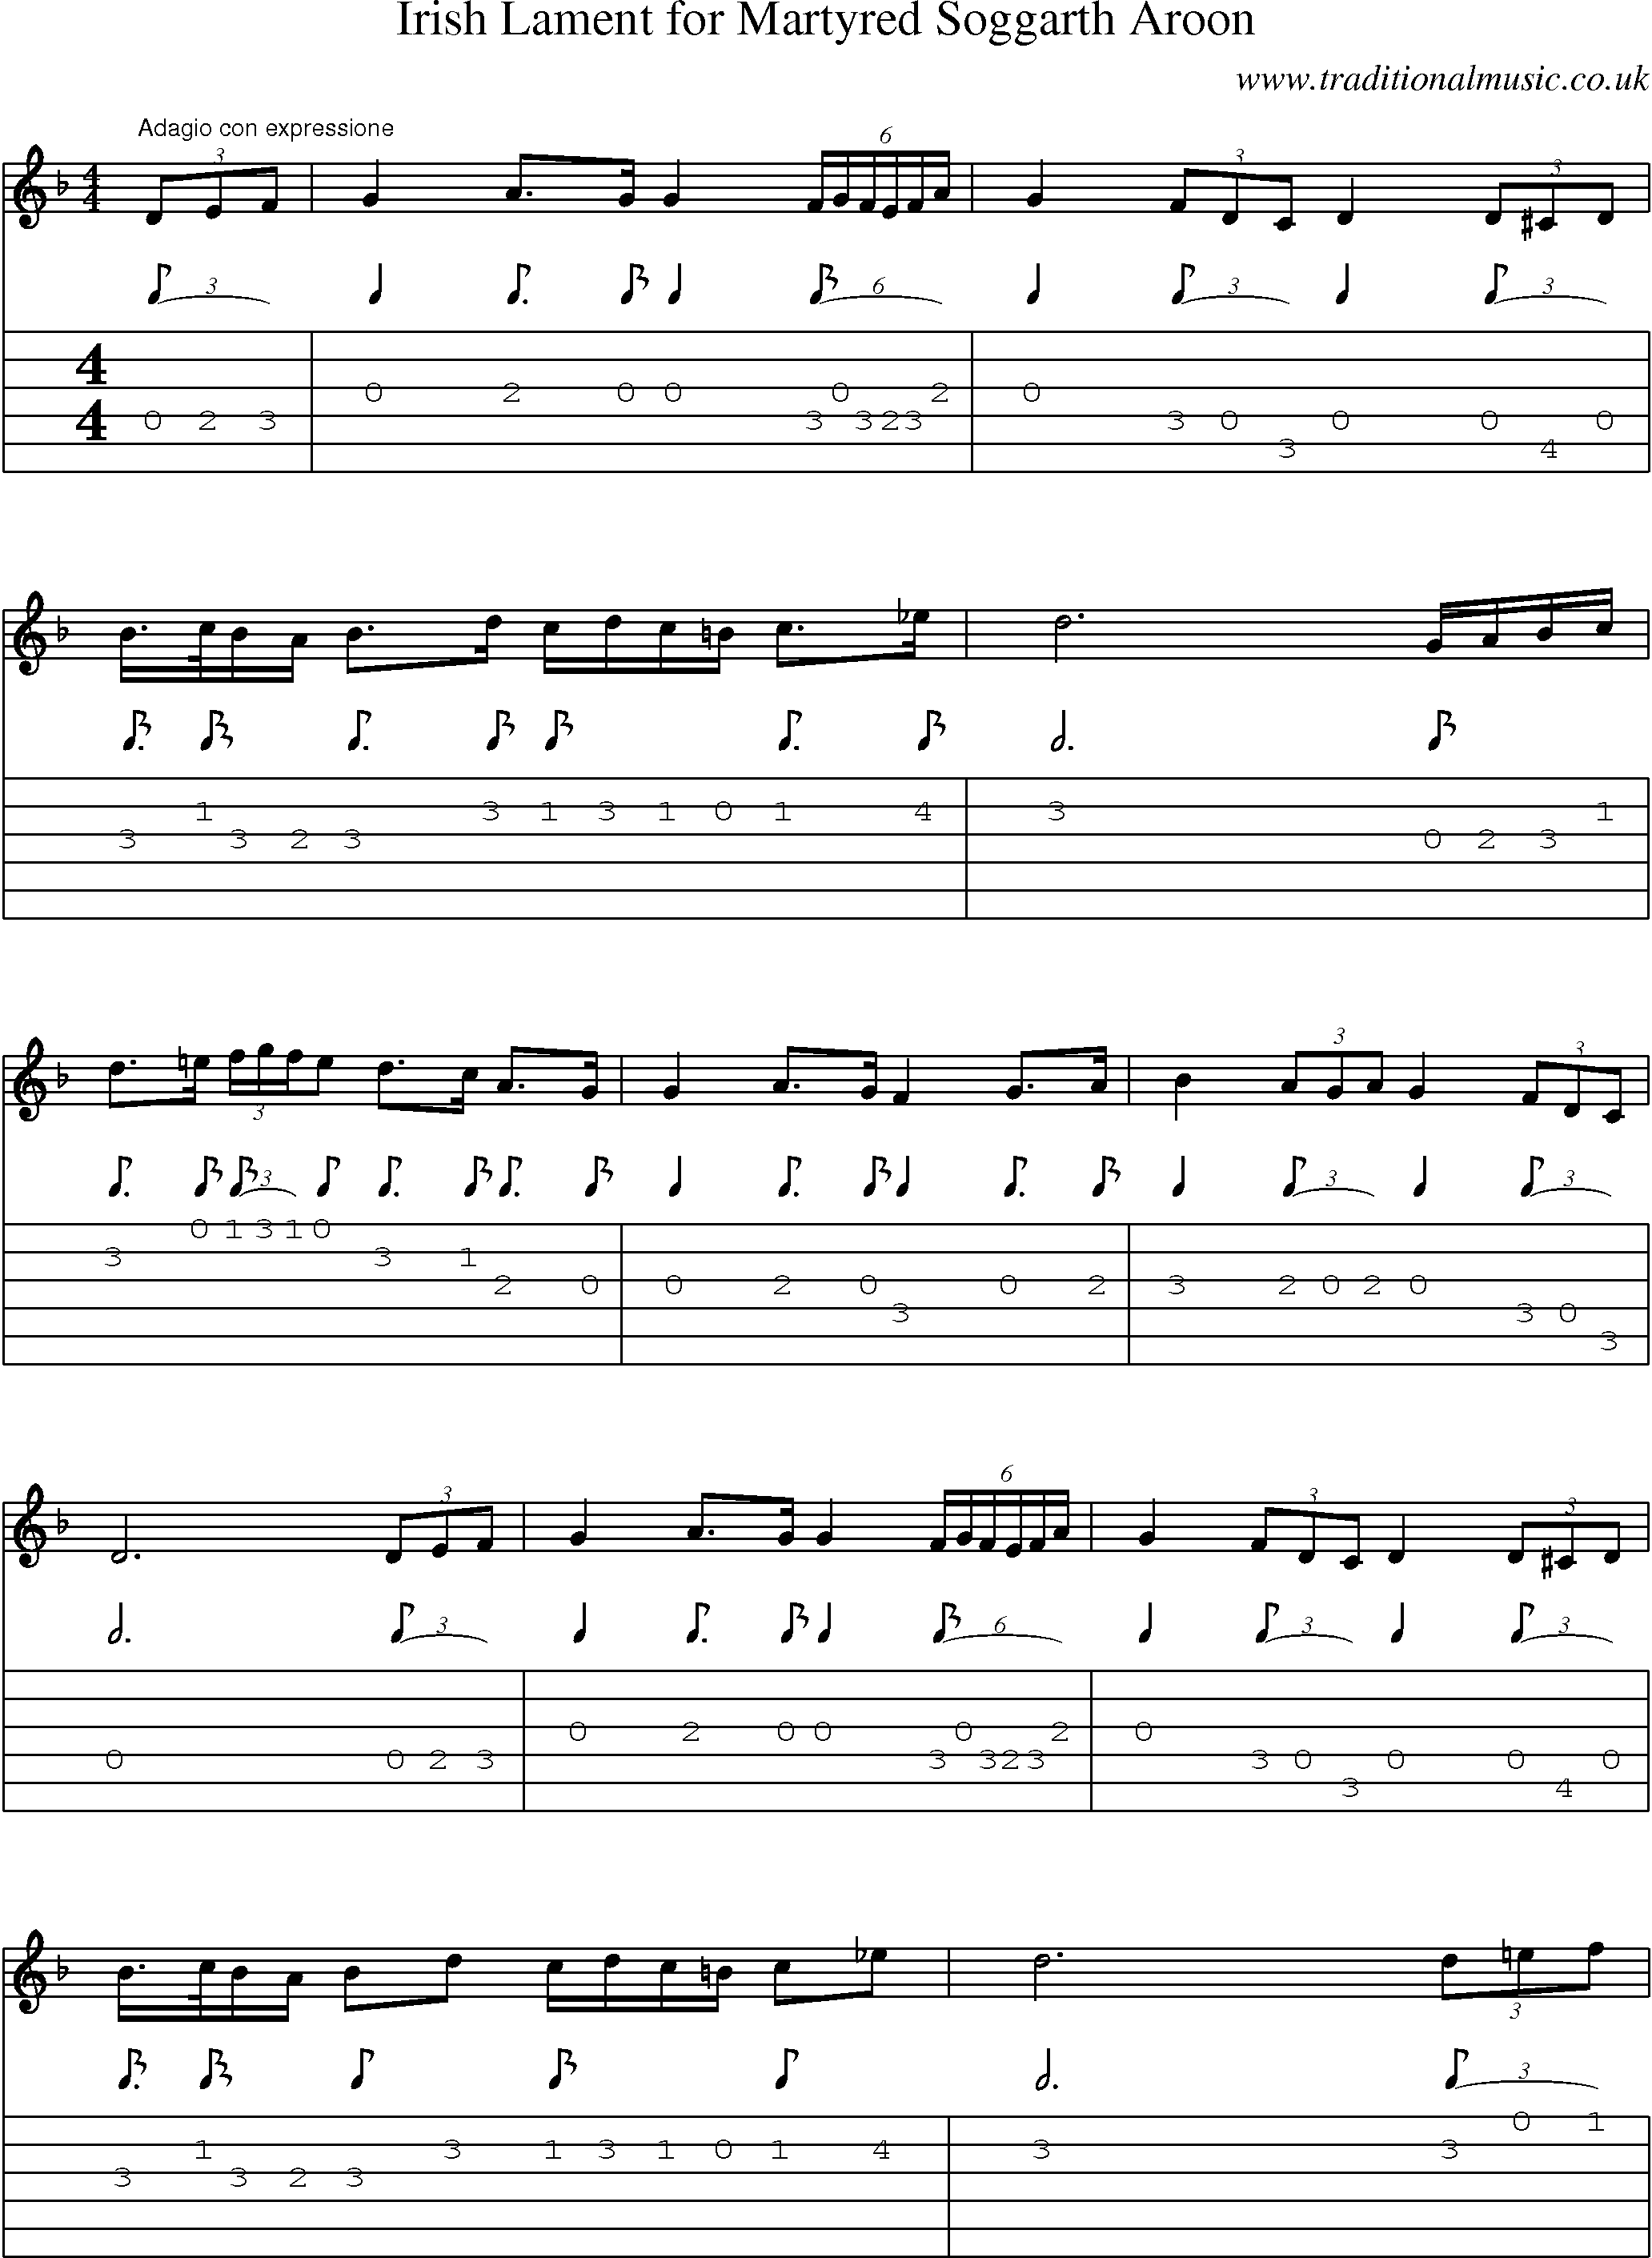 Music Score and Guitar Tabs for Irish Lament For Martyred Soggarth Aroon